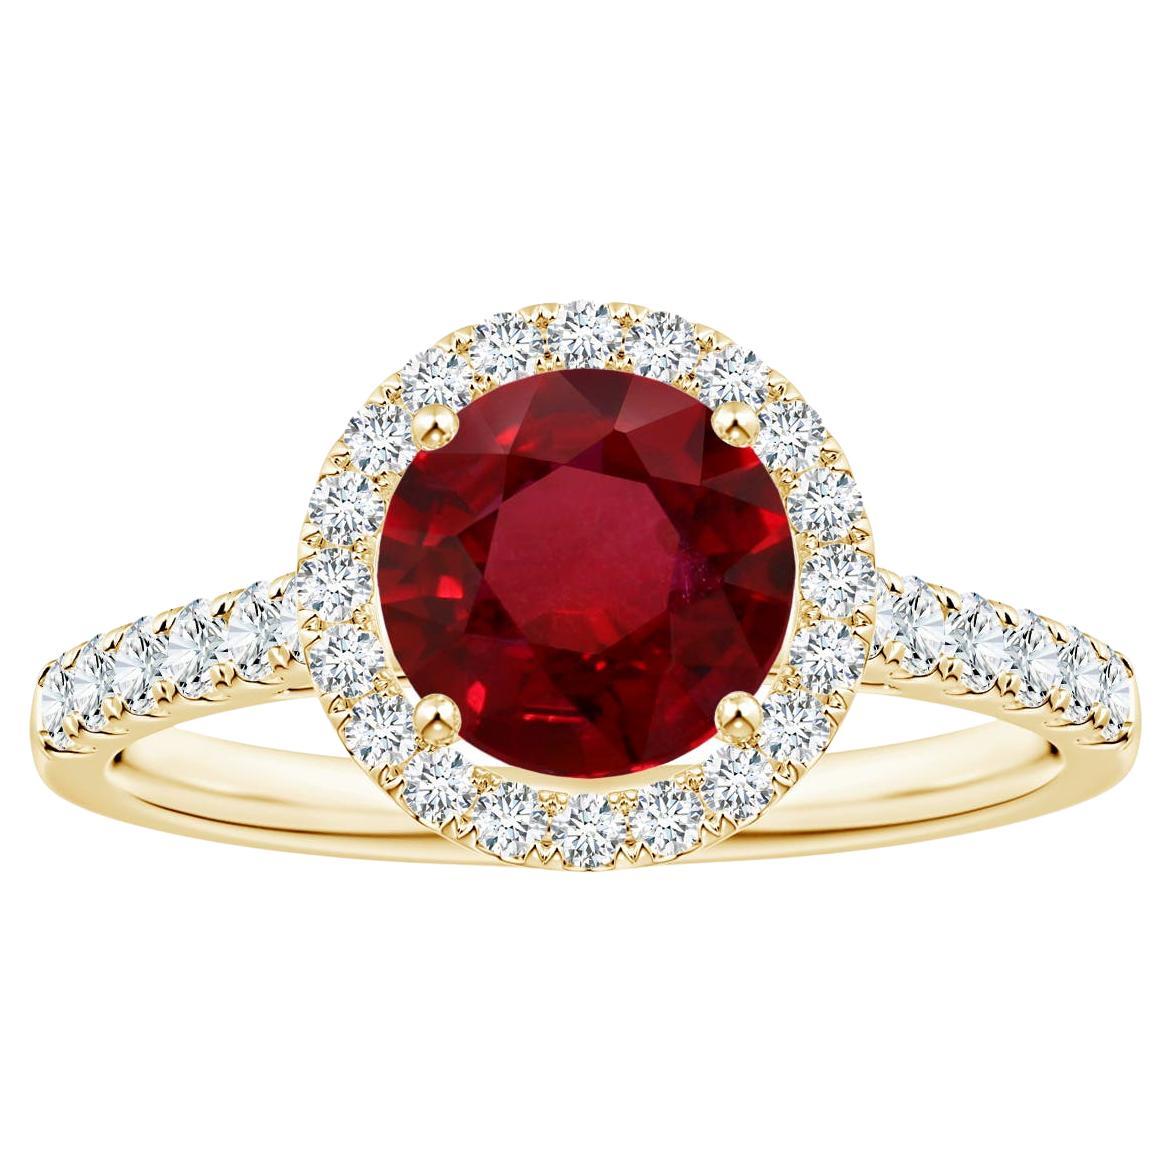 ANGARA GIA Certified Natural 1.54ct Ruby Halo Ring with Diamond in Yellow Gold